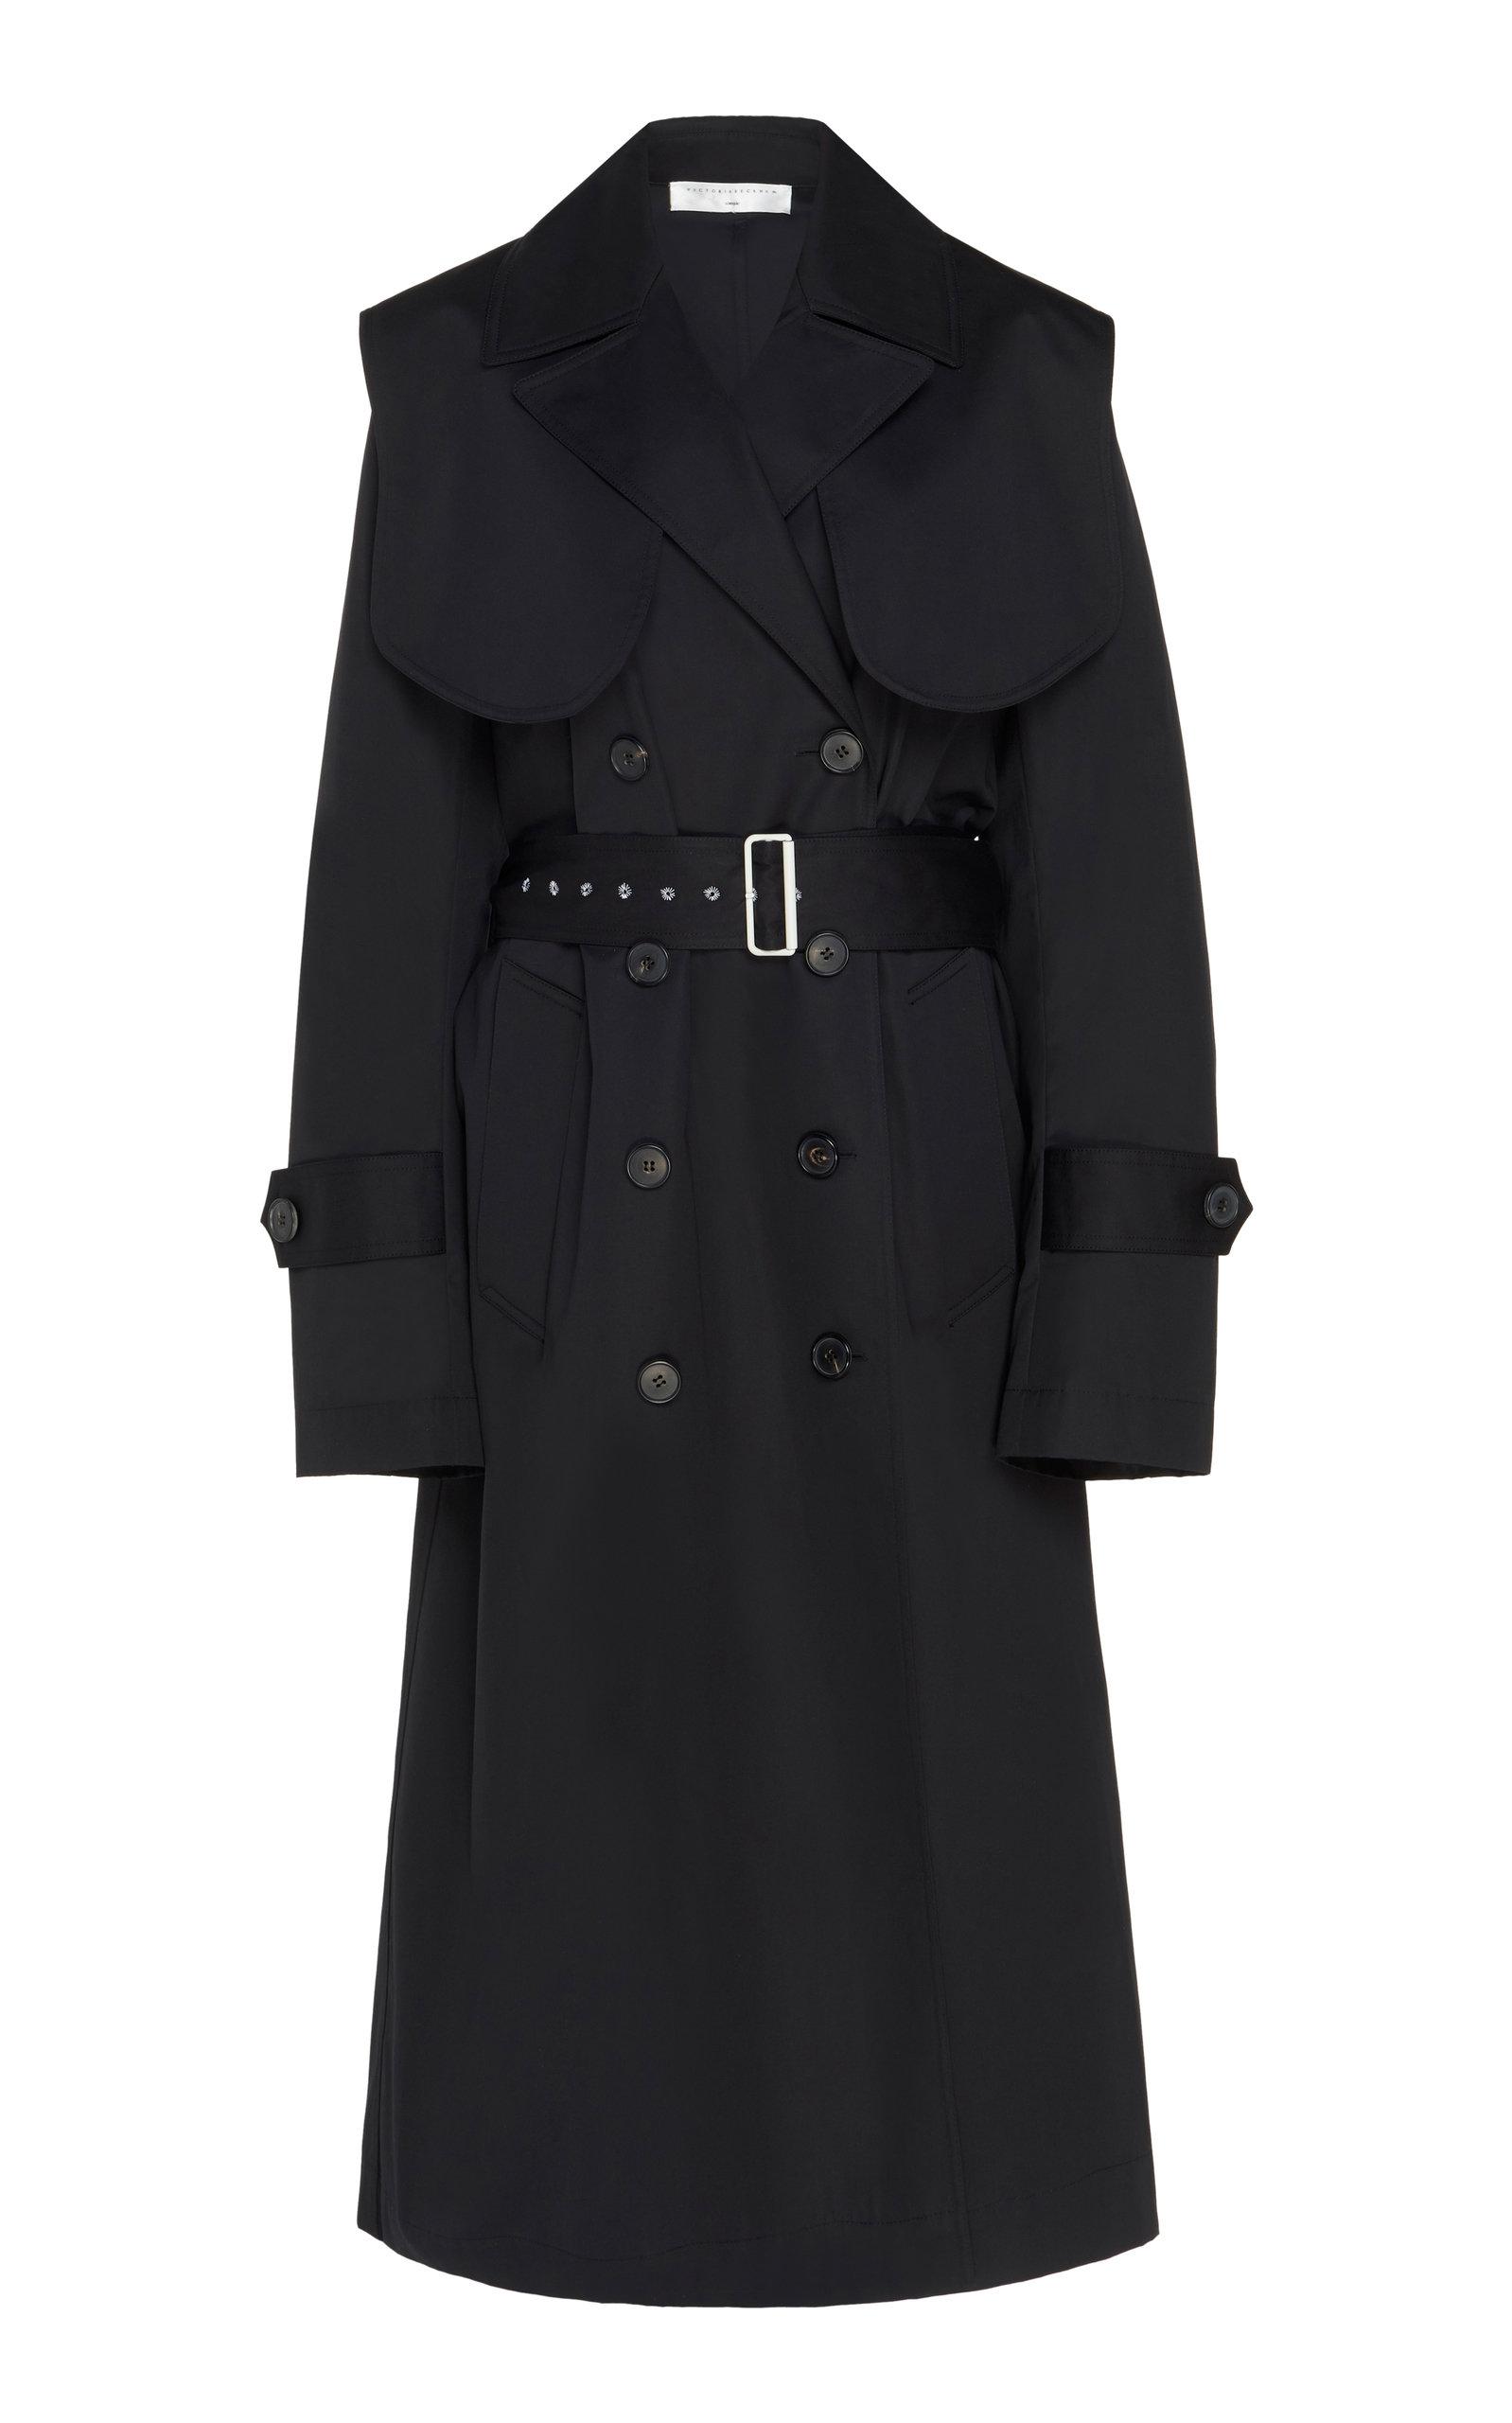 Victoria Beckham Double-breasted Cotton Trench Coat in Black - Lyst